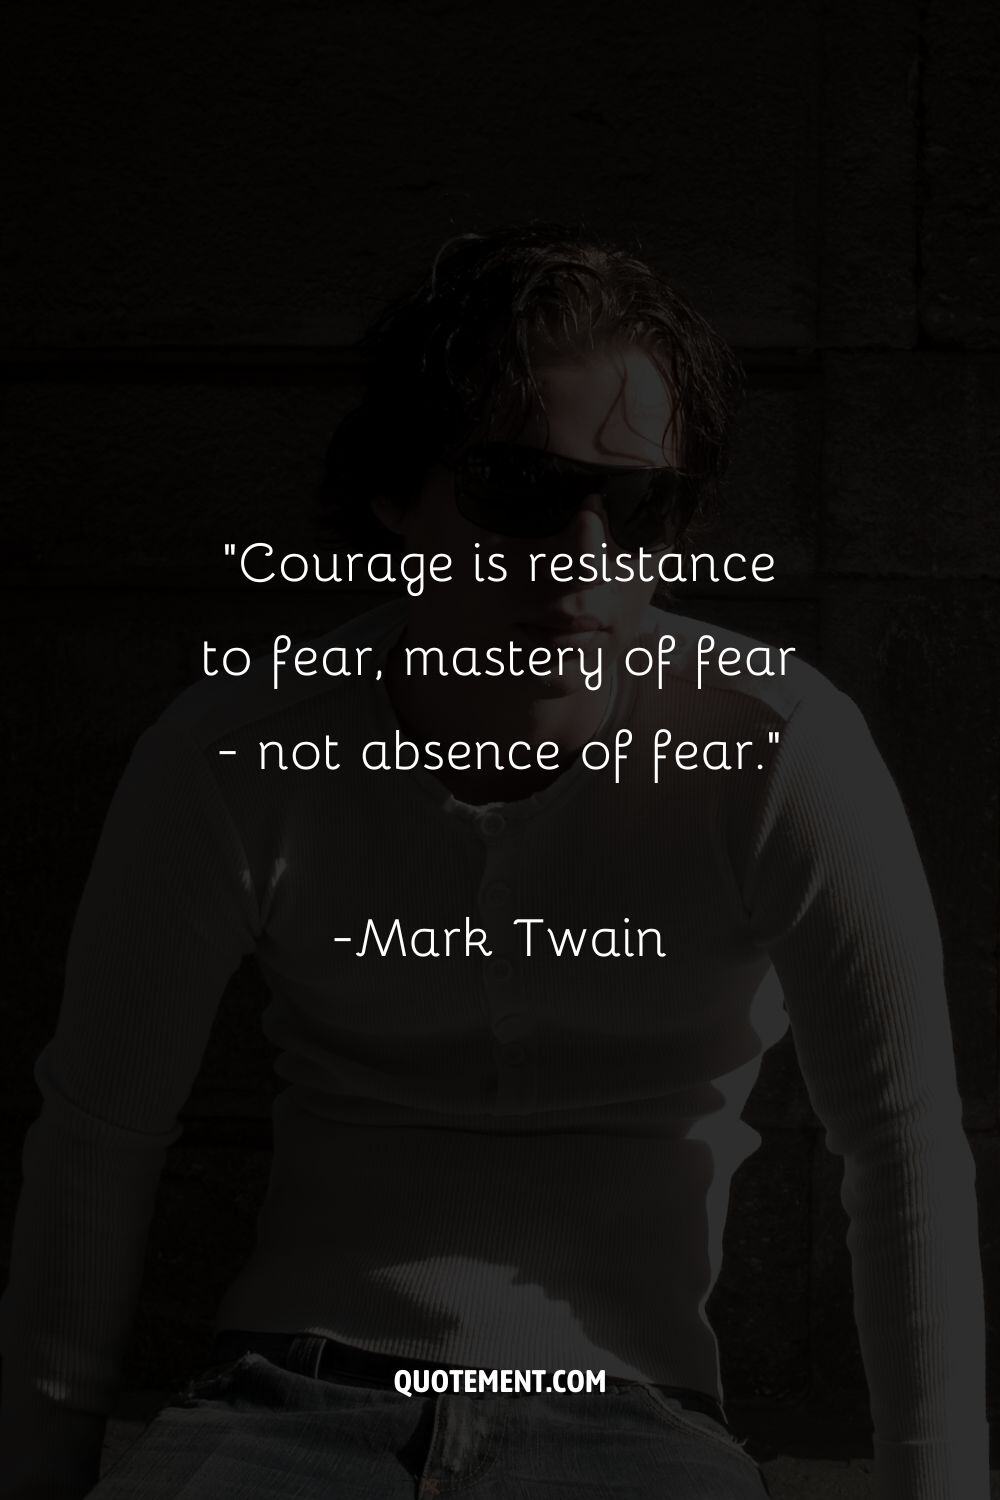 “Courage is resistance to fear, mastery of fear - not absence of fear.”